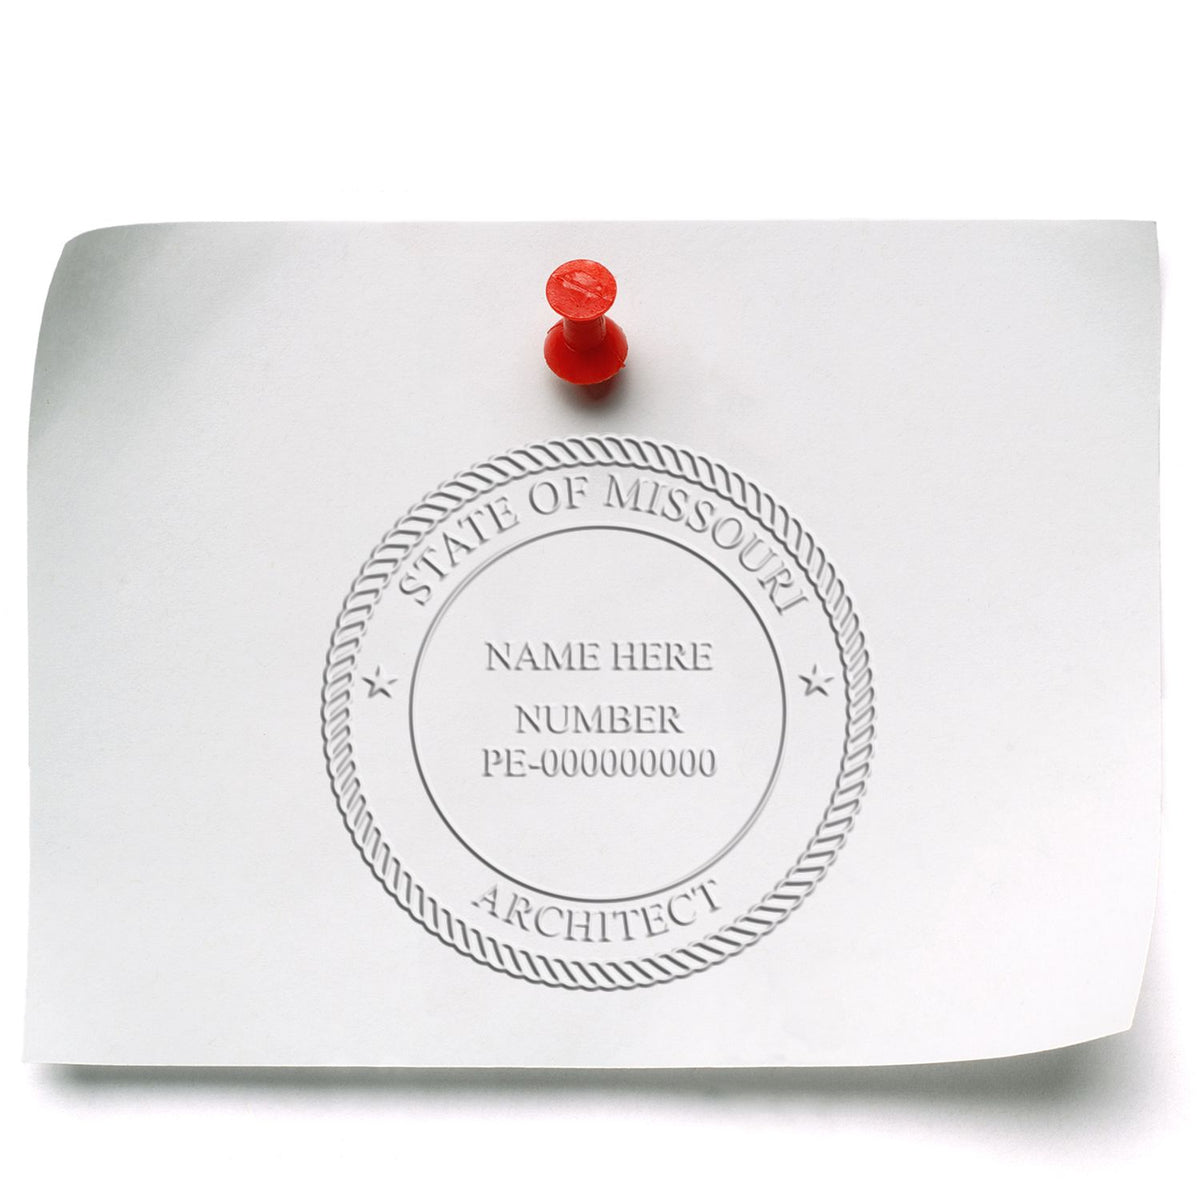 An in use photo of the Gift Missouri Architect Seal showing a sample imprint on a cardstock